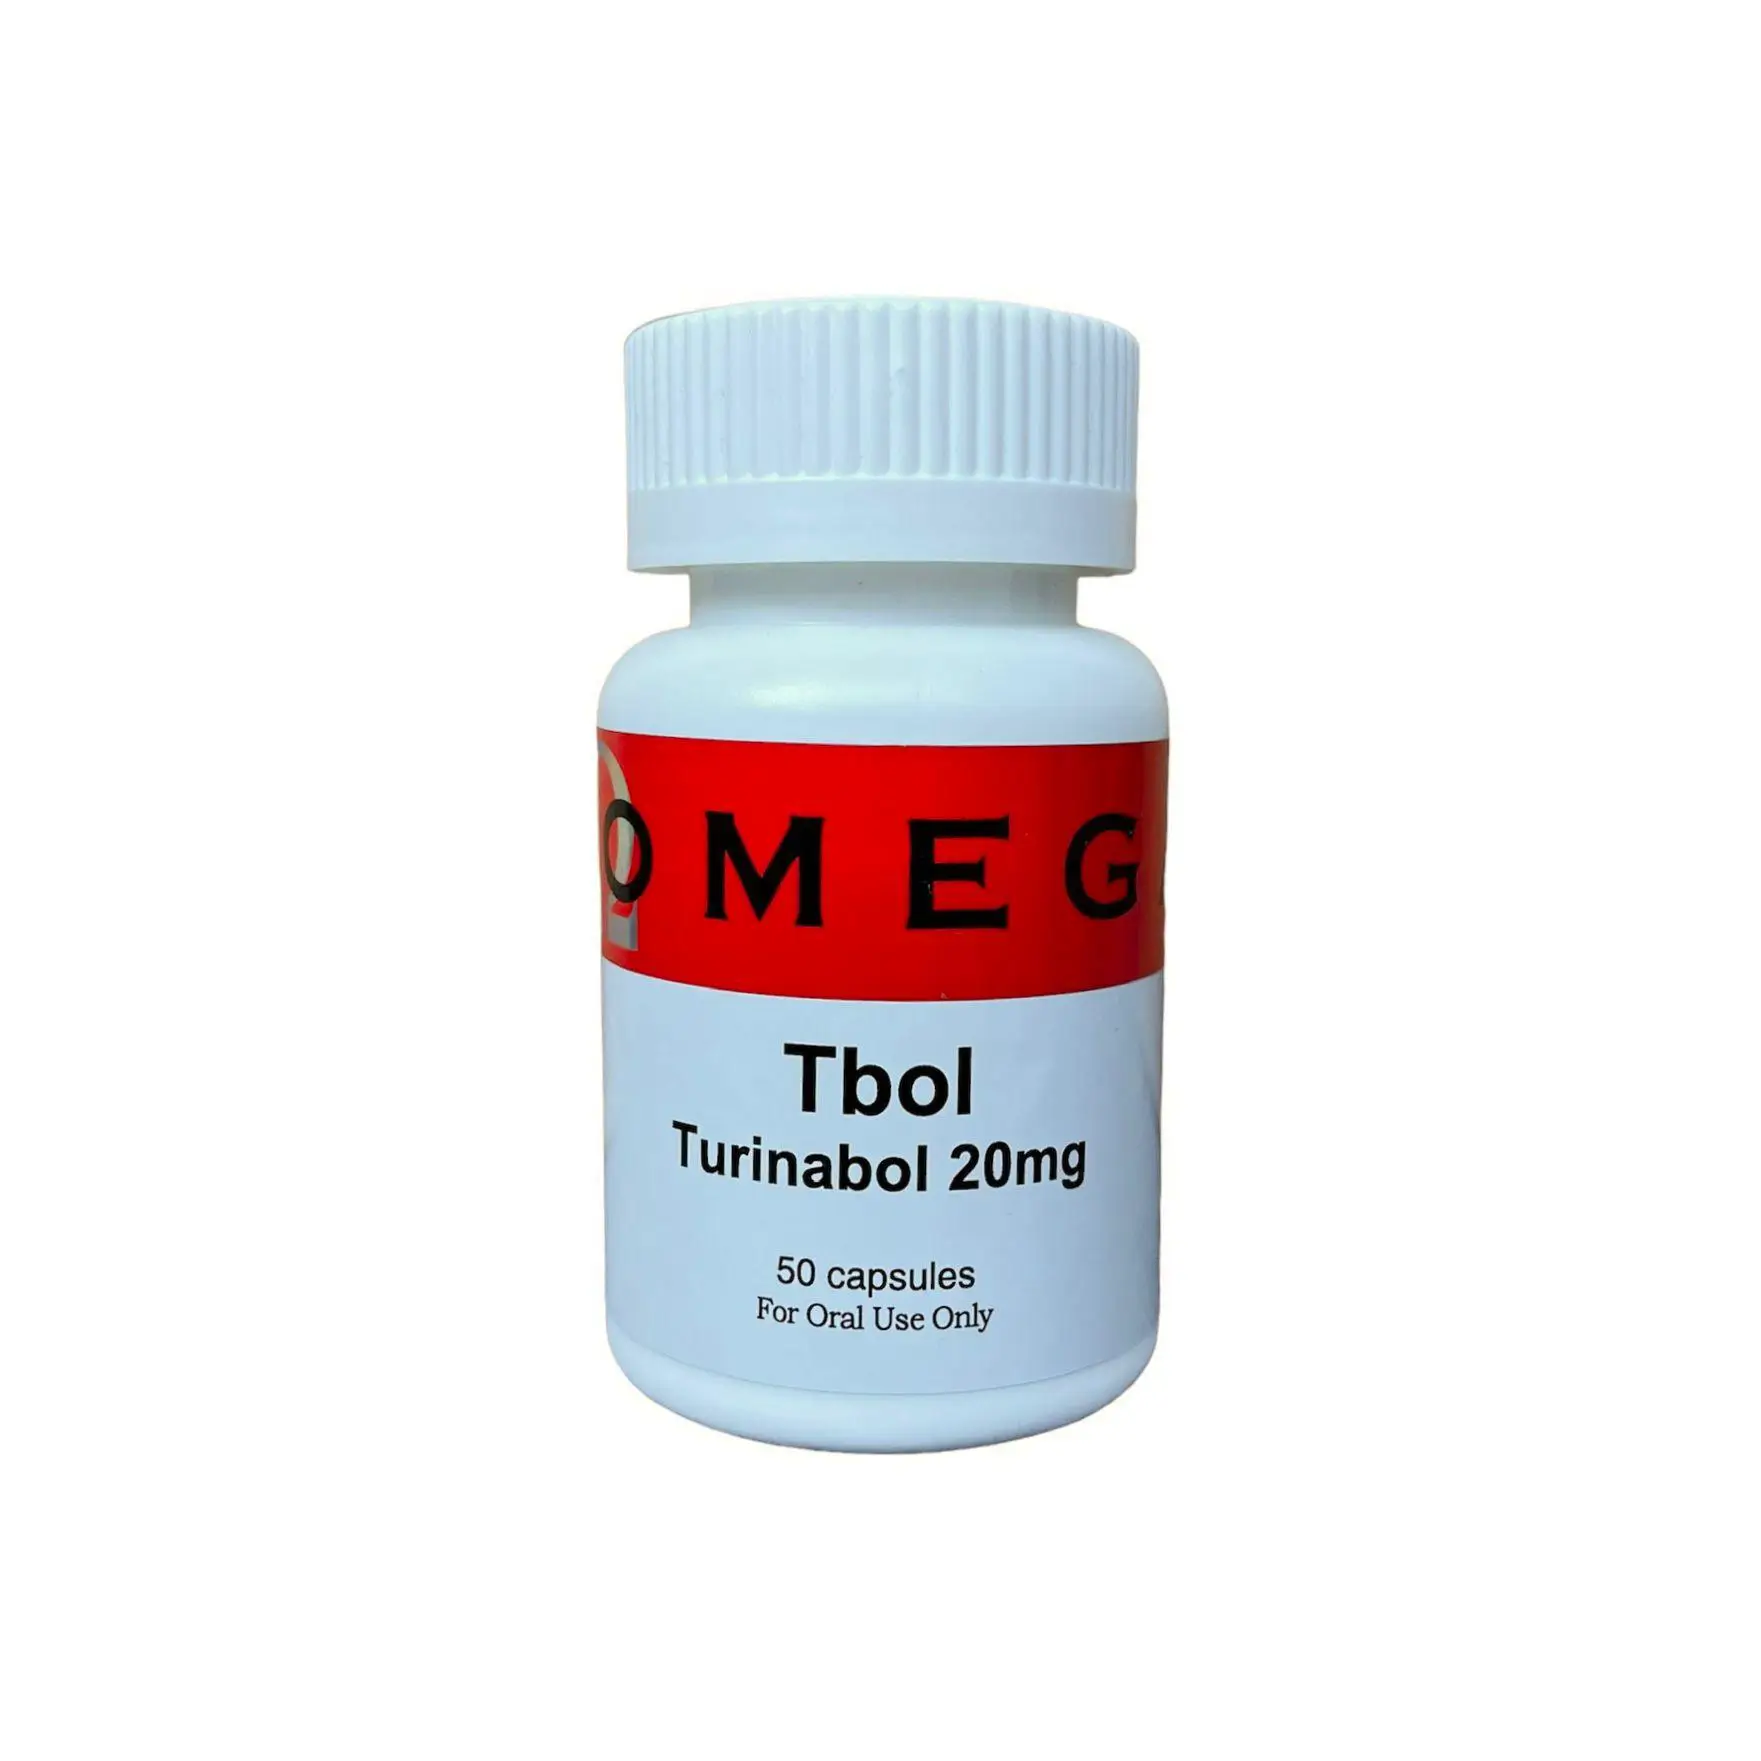 Close up photo of Omega Tbol or Turinabol Bottle, available to buy Tbol online, order Turinabol online, purchase Tbol Canada, best Tbol for sale, and find where to buy Turinabol.